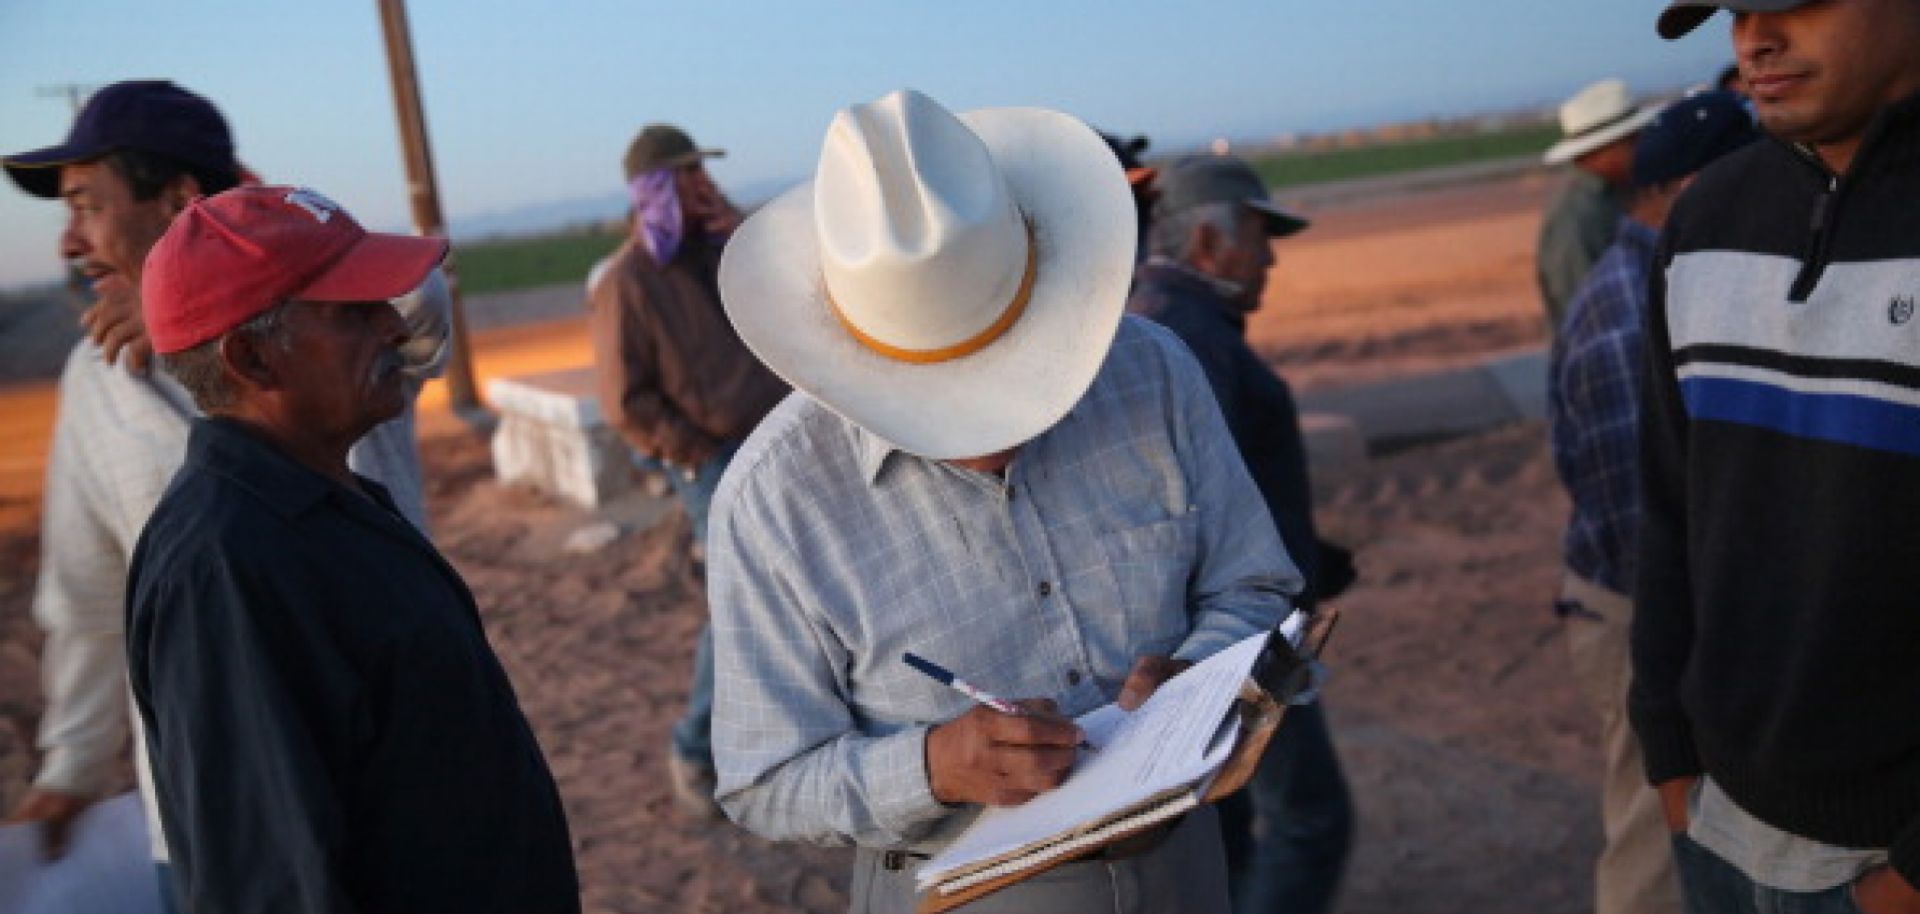 Mexican agricultural day laborers sign their names to a list before starting work on October 8, 2013 in Holtville, California. 